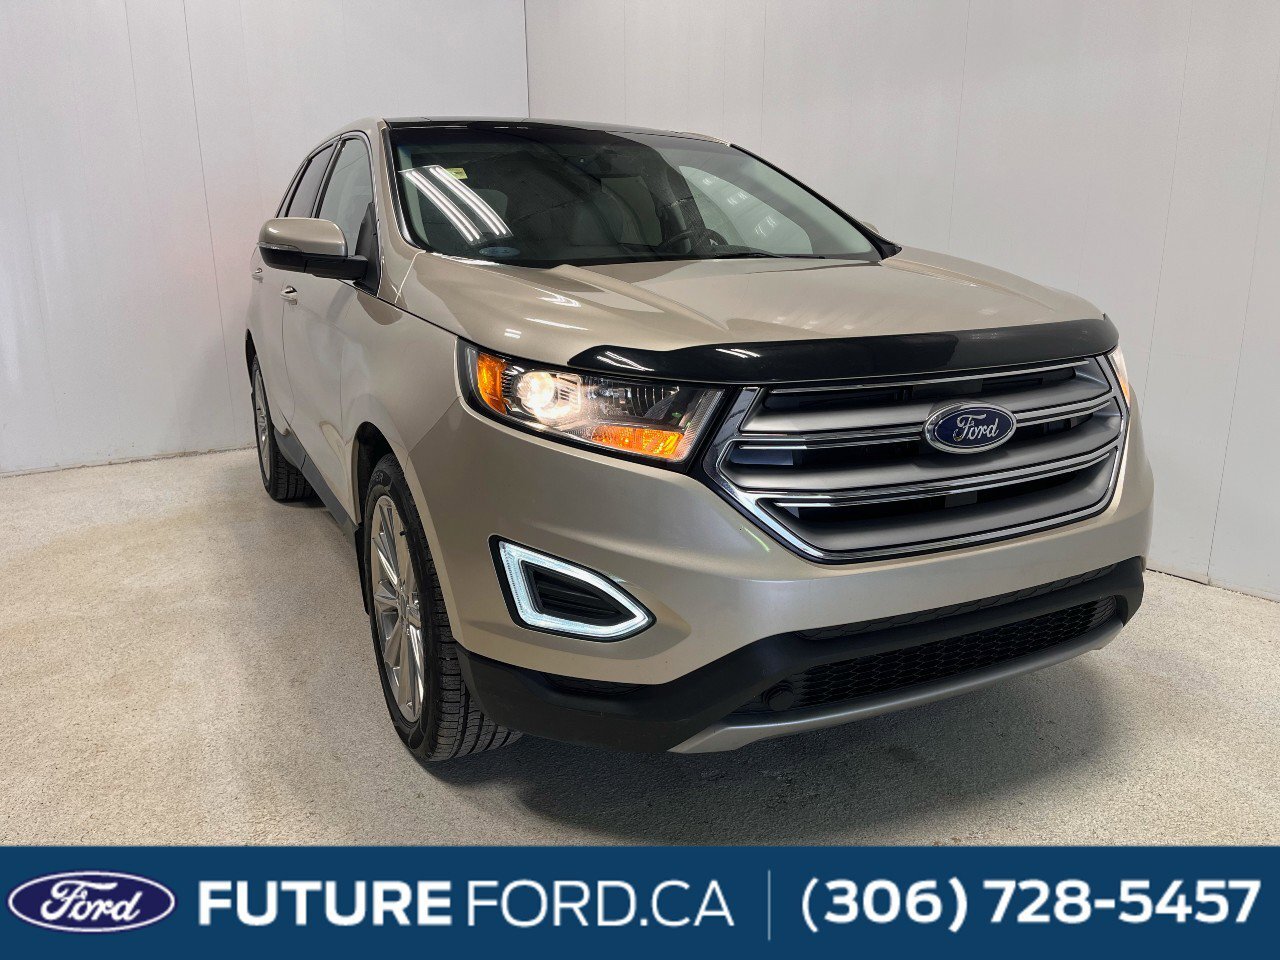 2018 Ford Edge Titanium | HEATED & COOLED SEATS | REAR VIEW CAMER